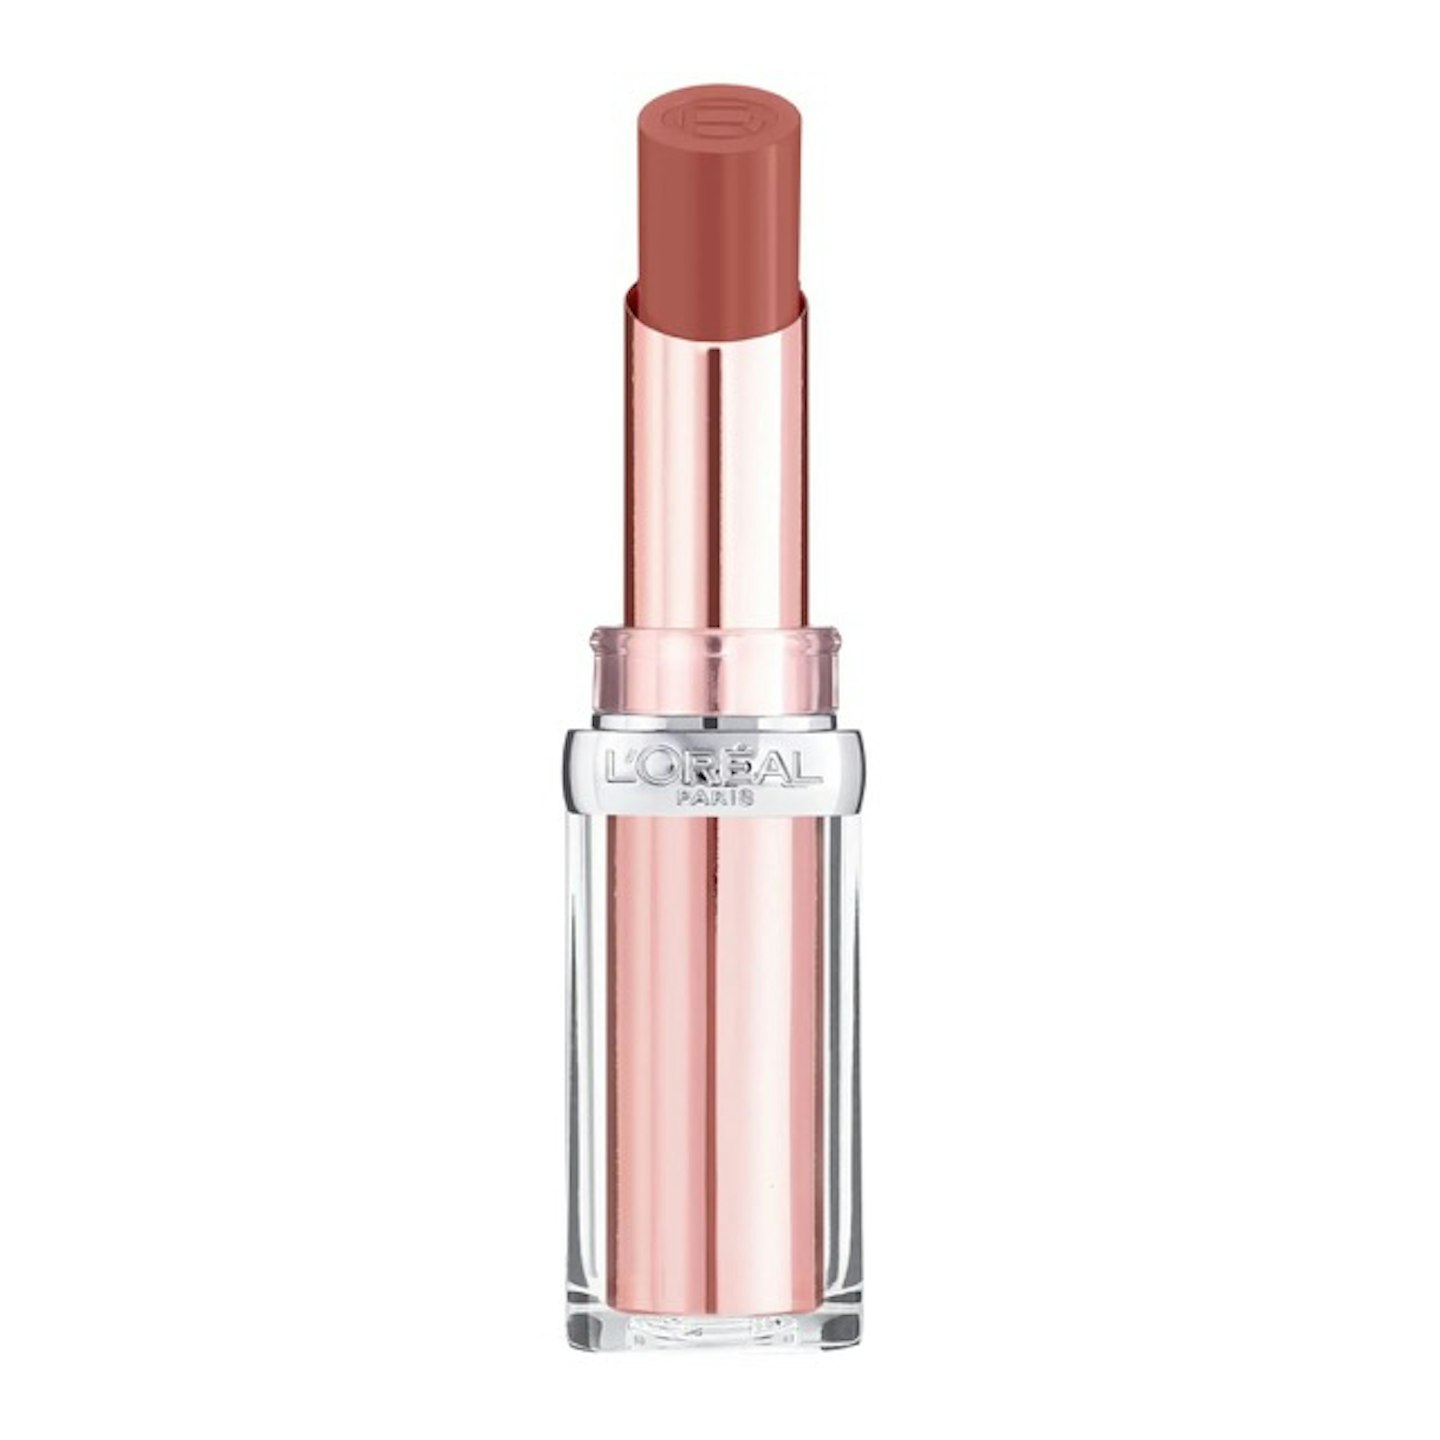 L'Oréal Paris Glow Paradise Natural-Looking Balm-In-Lipstick in Nude Heaven